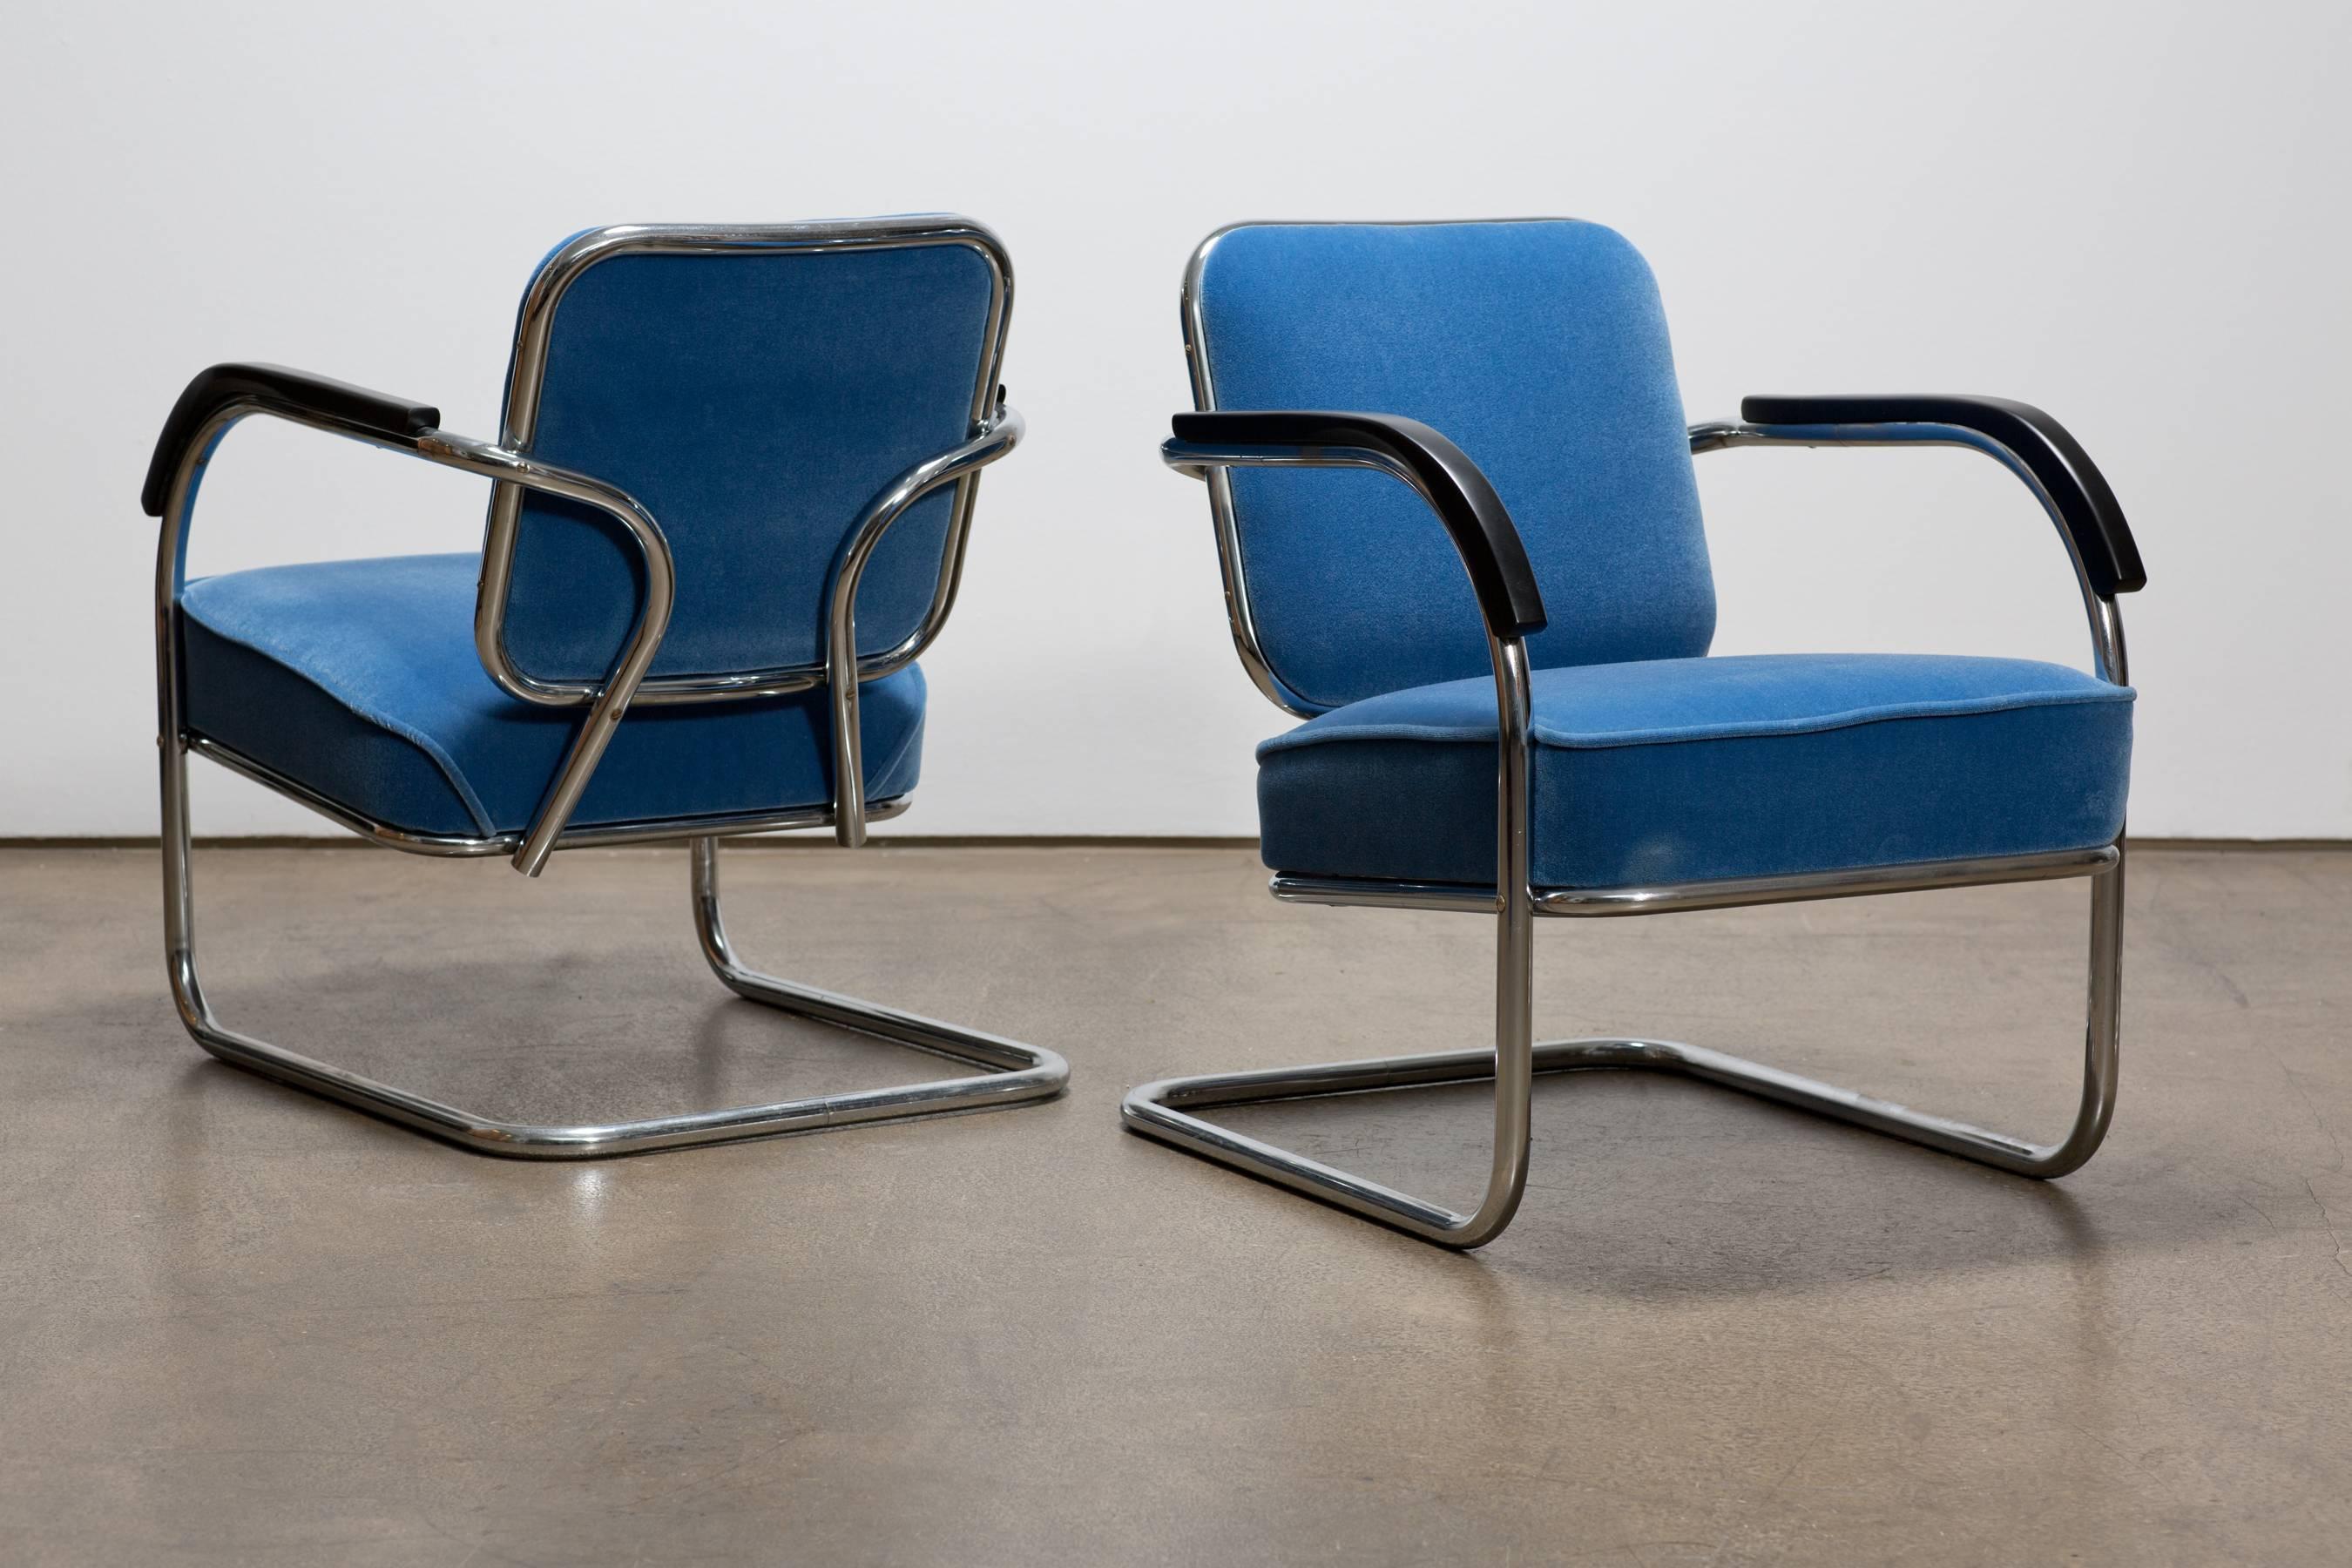 A Pair of Midcentury Cantilever Tubular Steel Armchairs with Mohair Upholstery (Mitte des 20. Jahrhunderts)